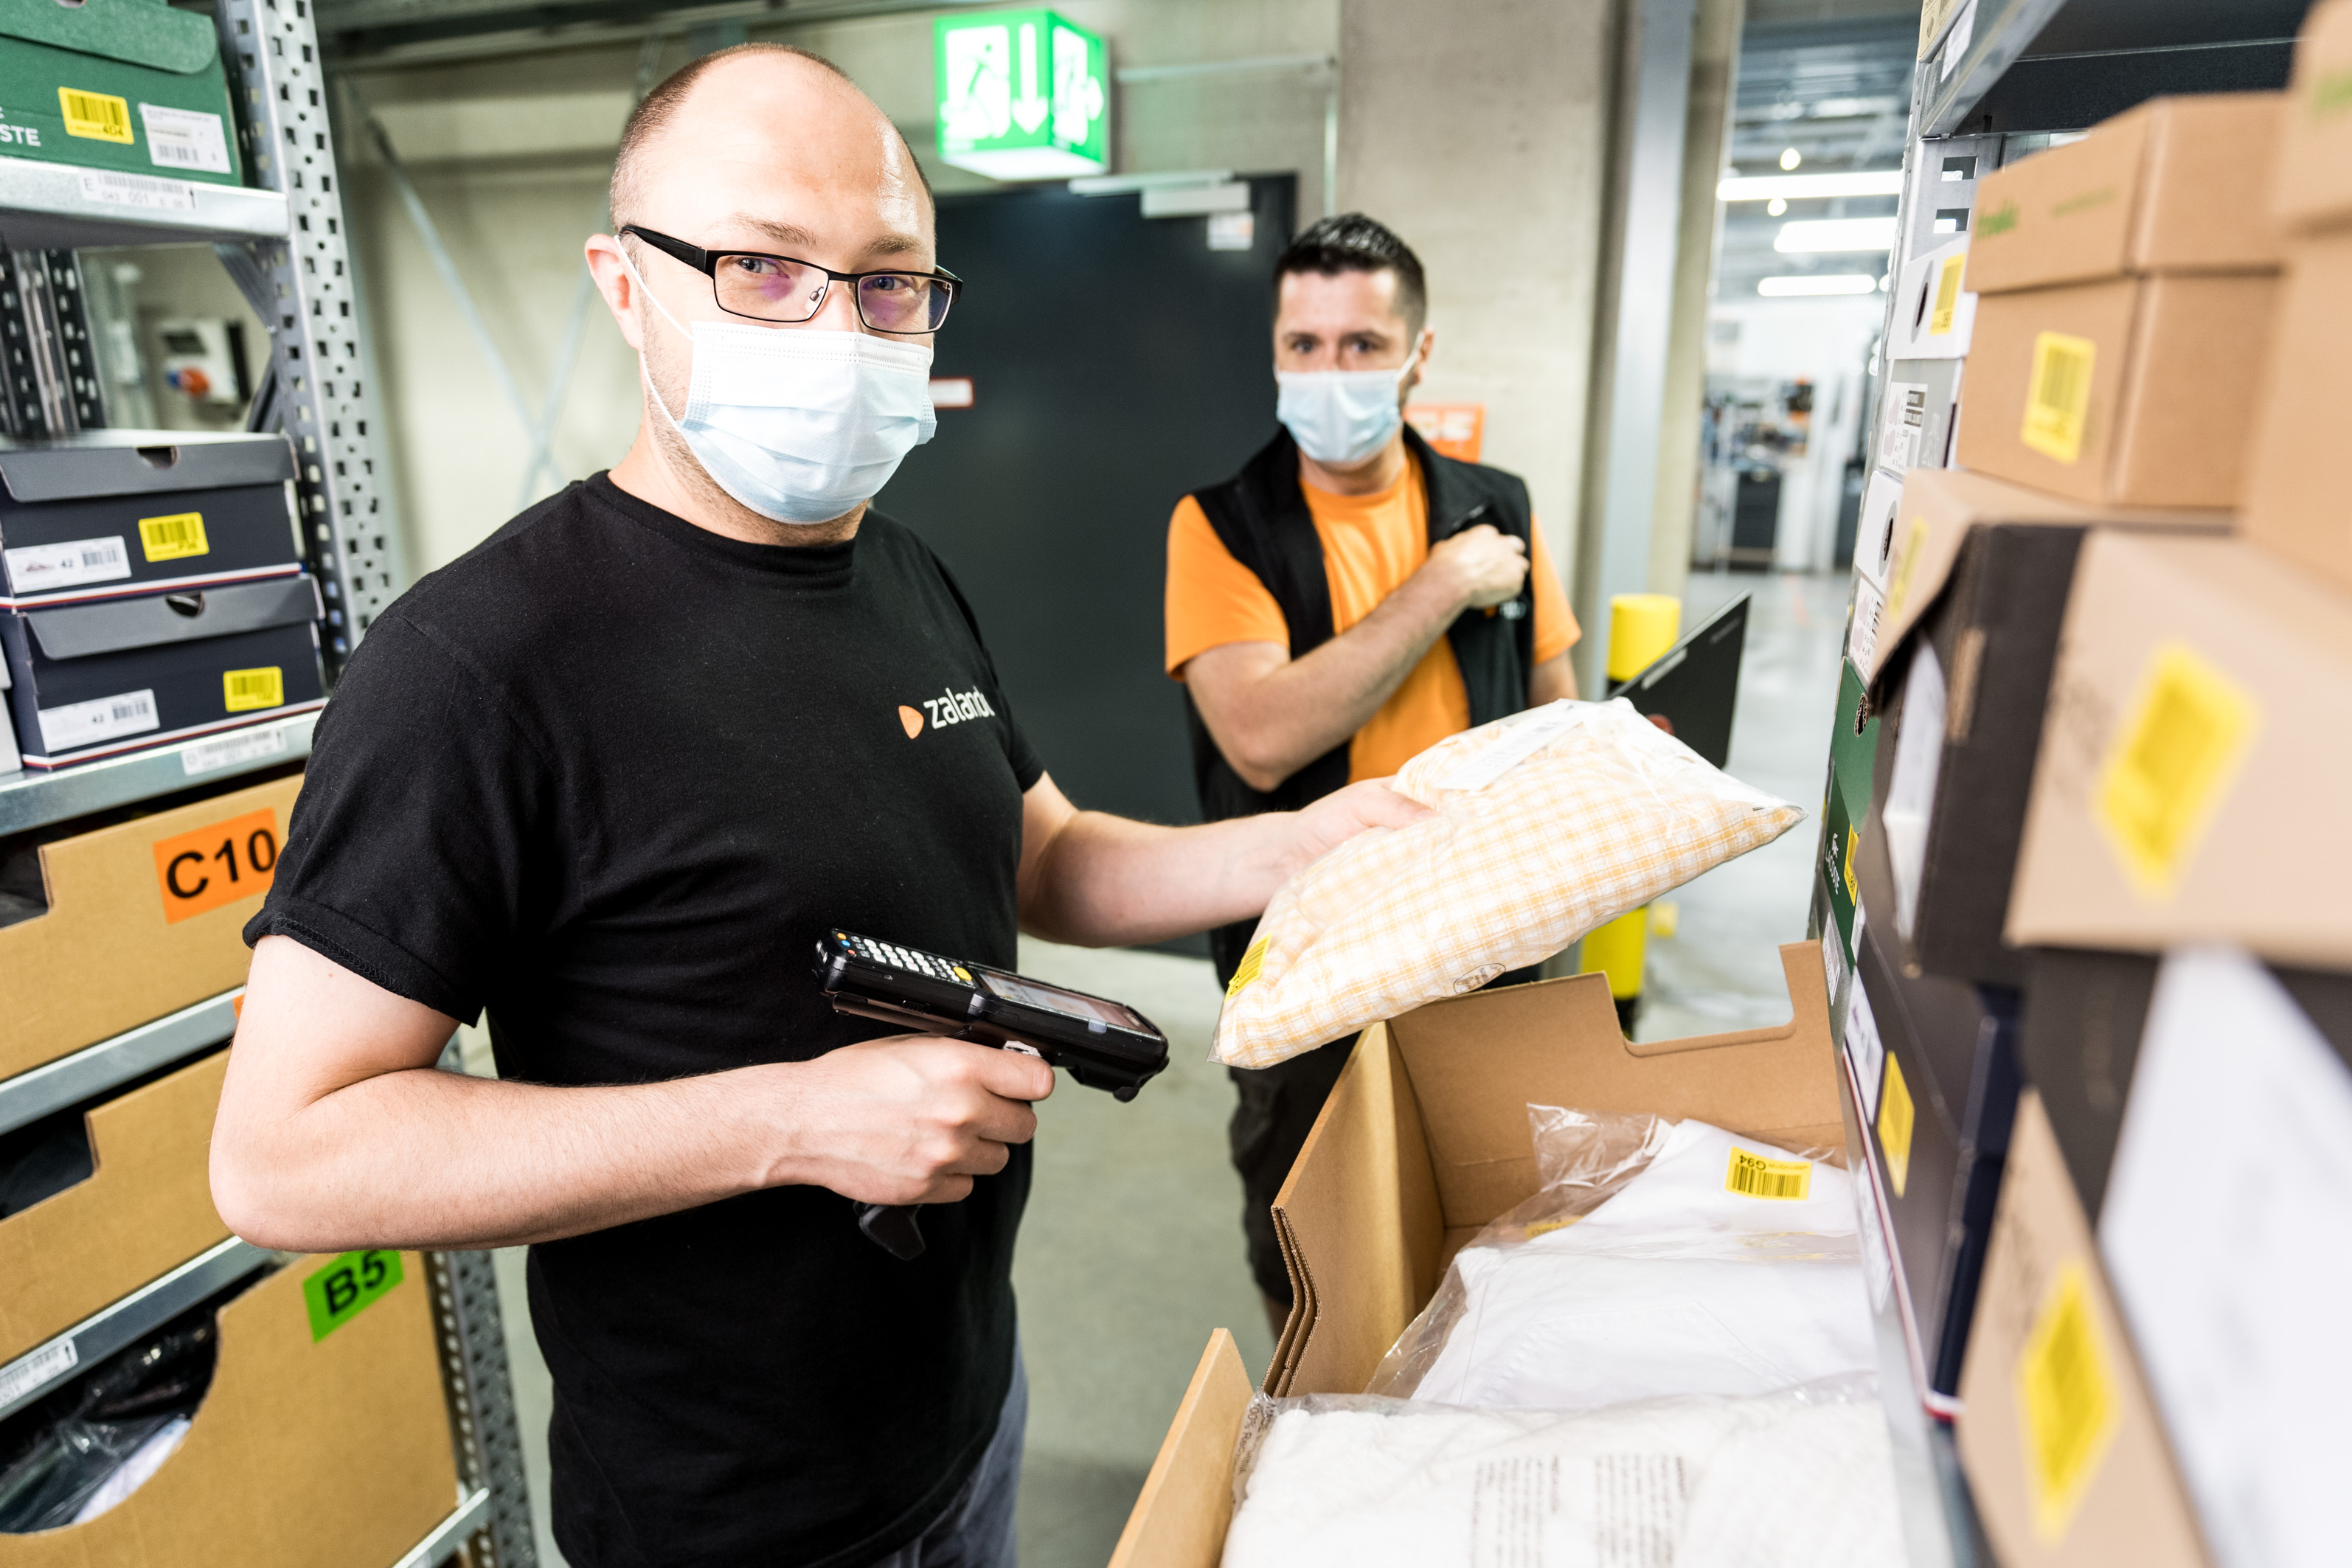 Two logistics employees scanning products and looking at the camera